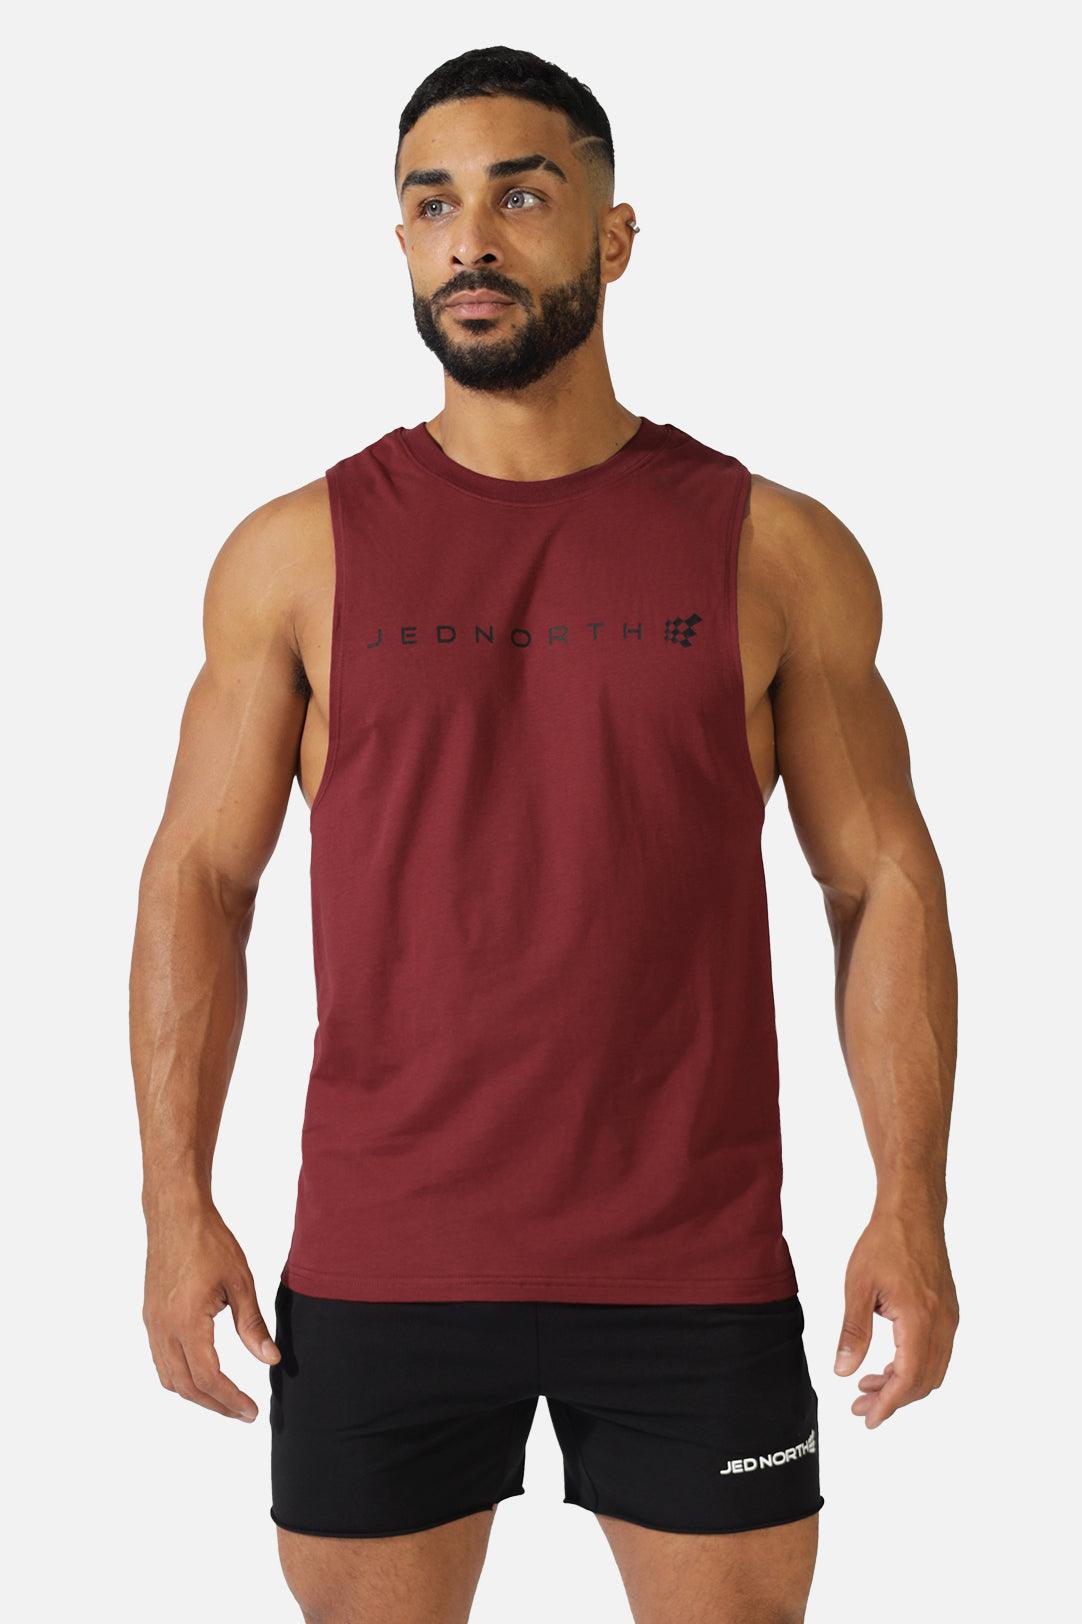 Women's Racerback Workout Tank Tops Dry Fit Muscle Tee Top - White Burgundy  / XS